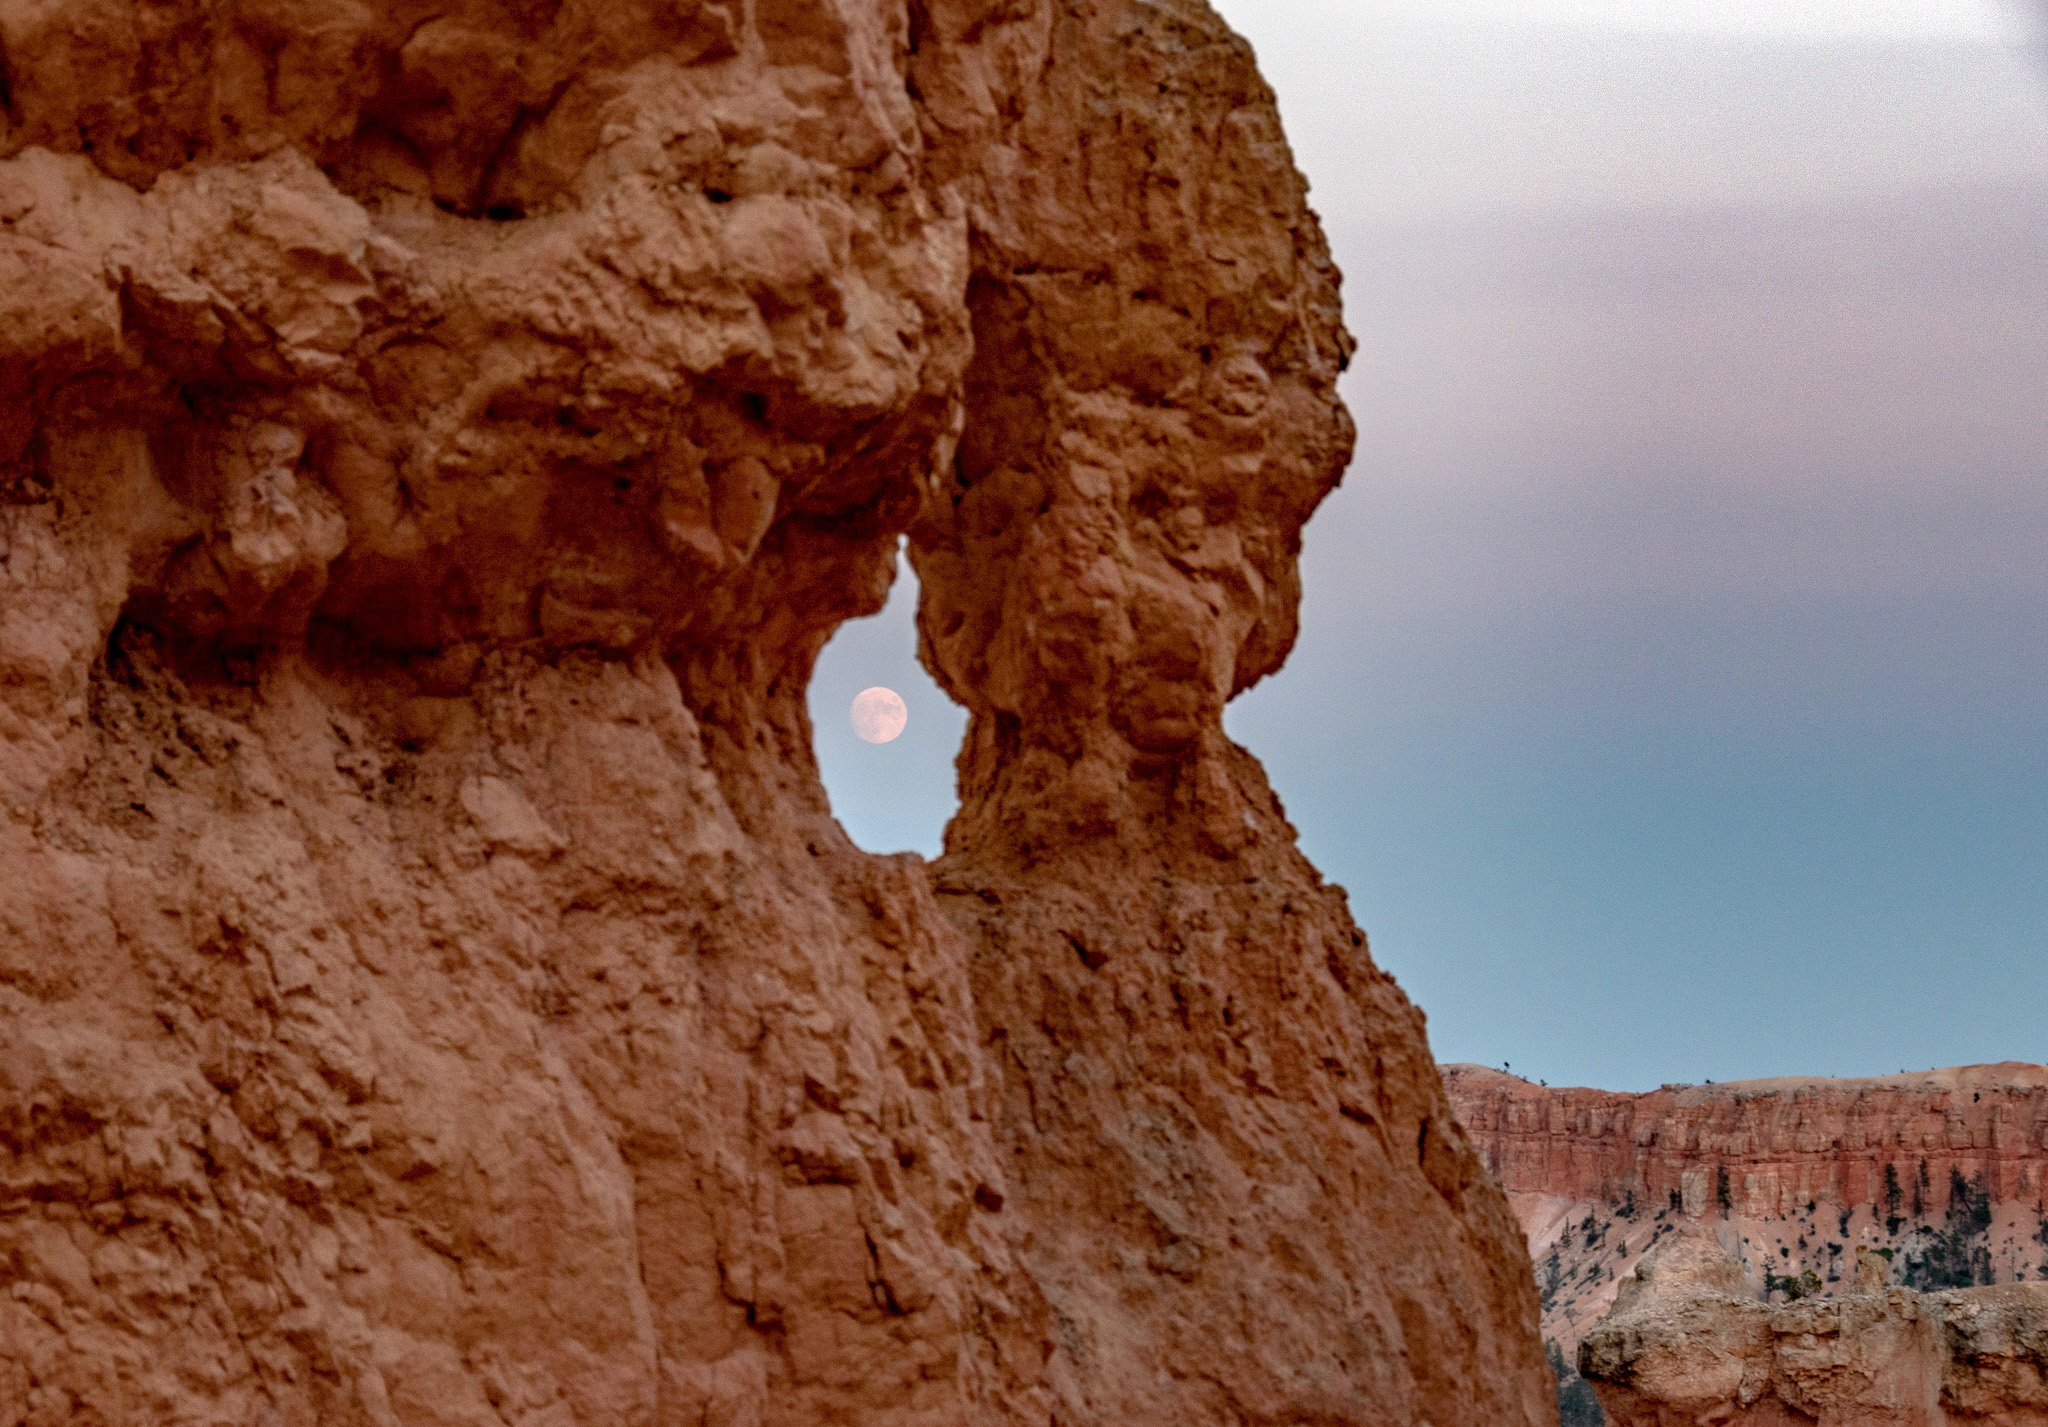 A full moon rising is visible through a hole in a rock wall